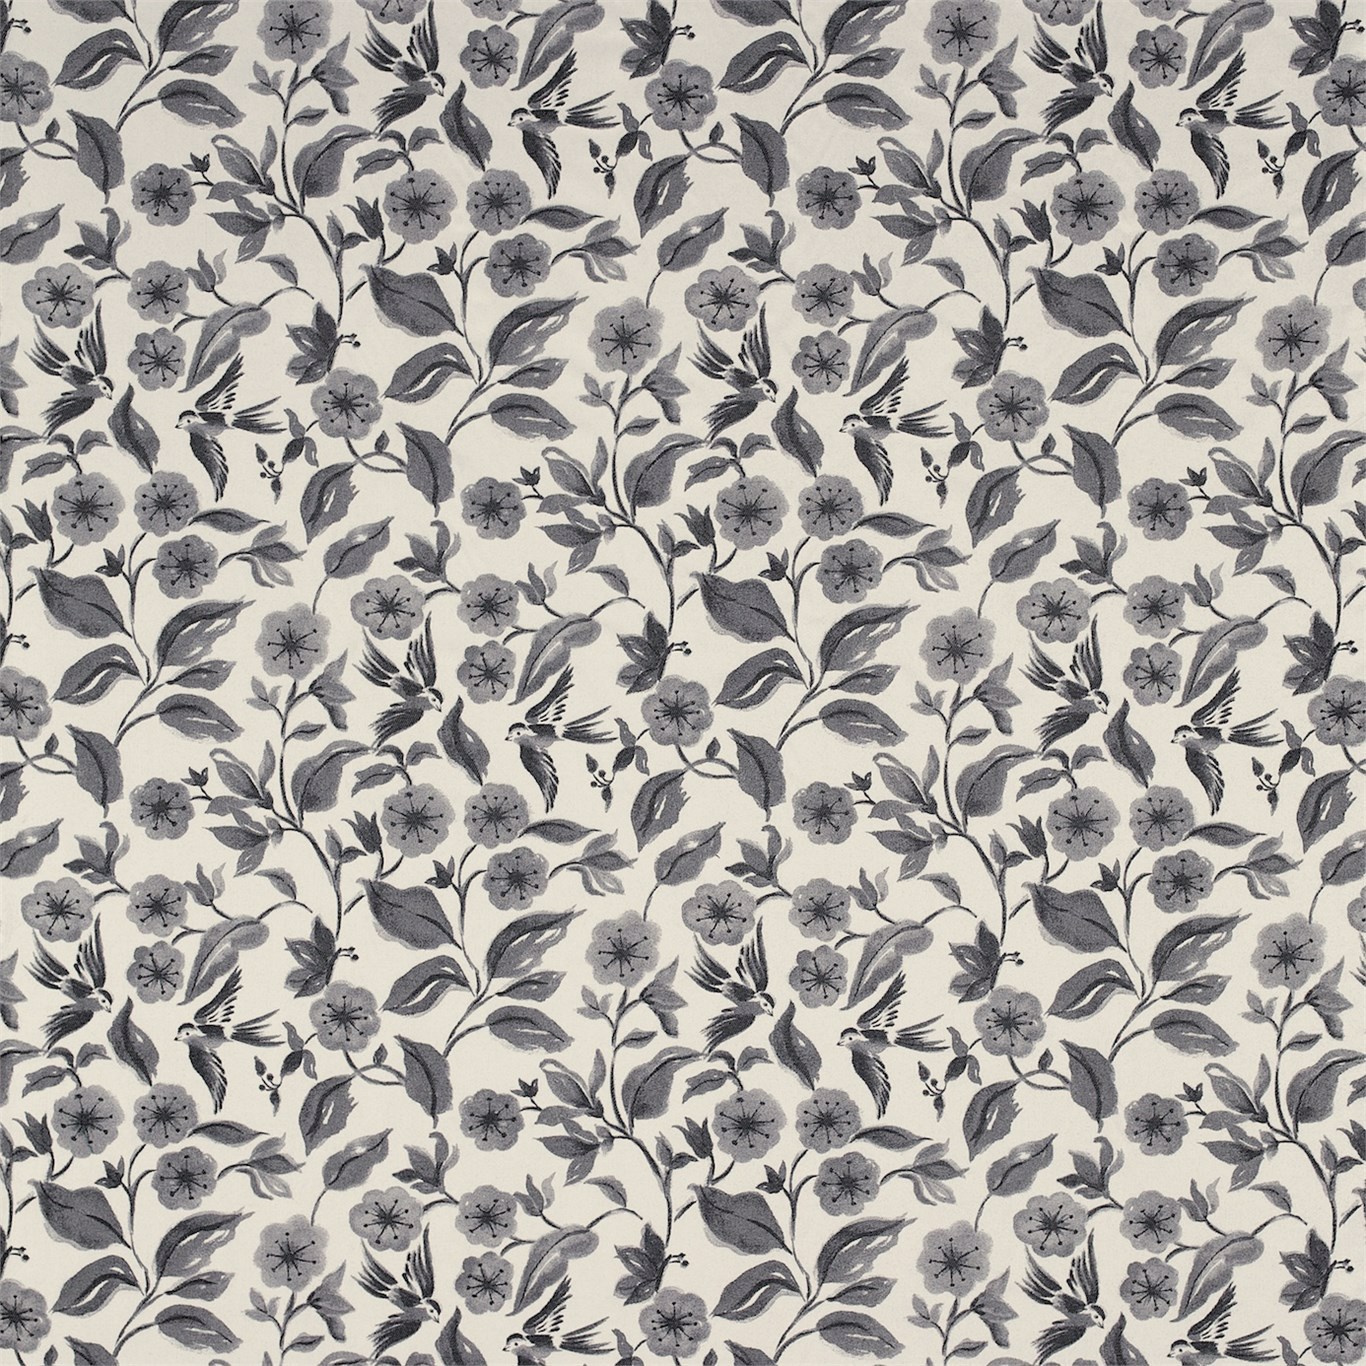 Bird Blossom Charcoal Fabric by SAN